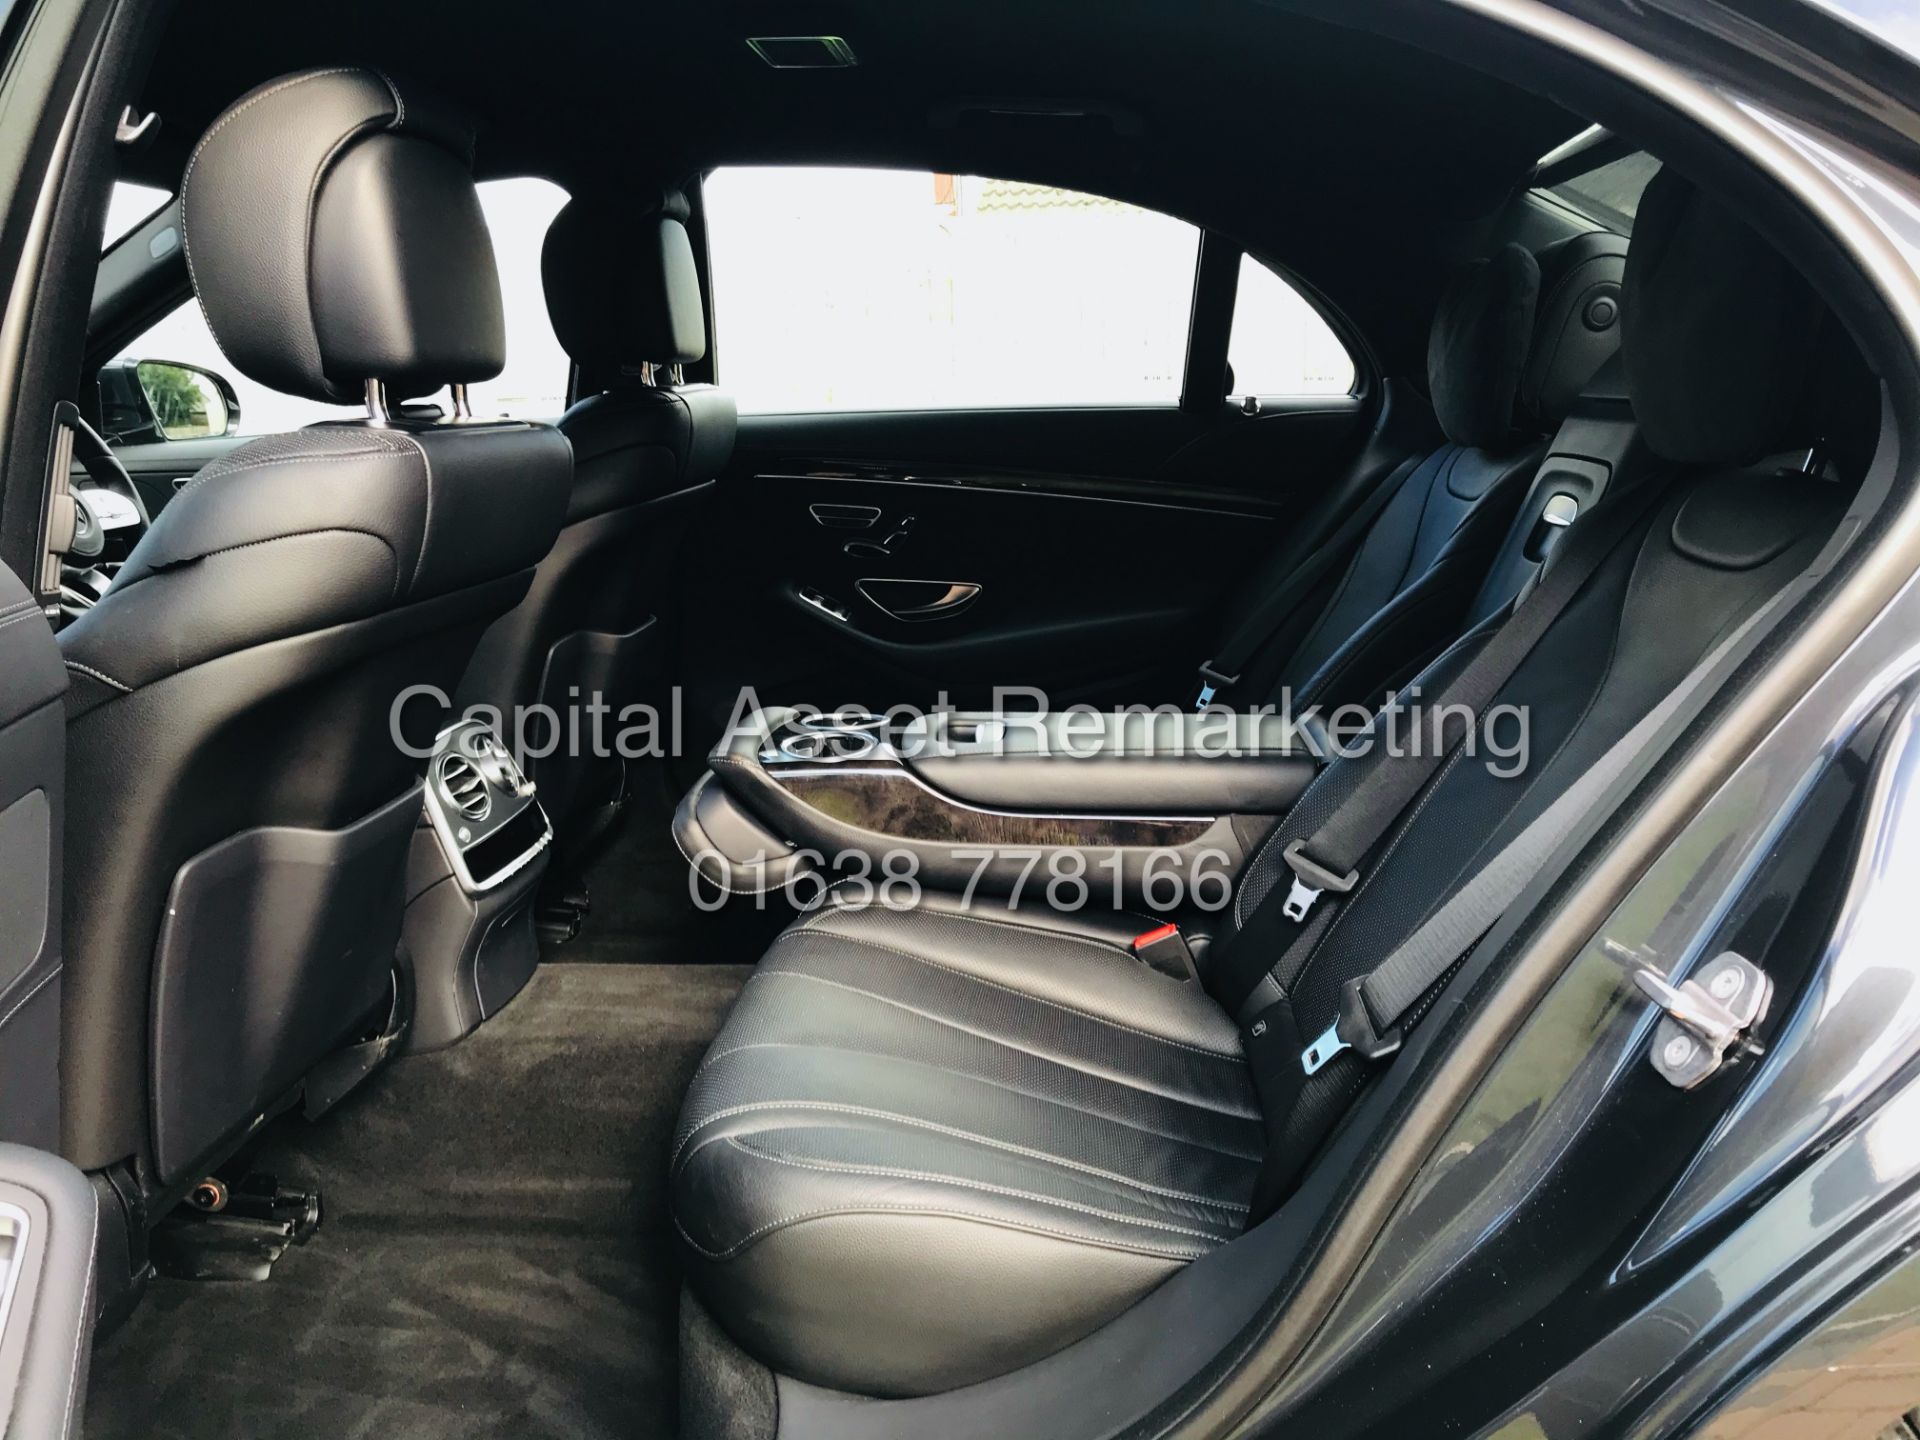 (On Sale) MERCEDES-BENZ S350D LWB *AMG LINE - EXECUTIVE SALOON* (2019) 9-G TRONIC *TOP OF THE RANGE* - Image 23 of 23